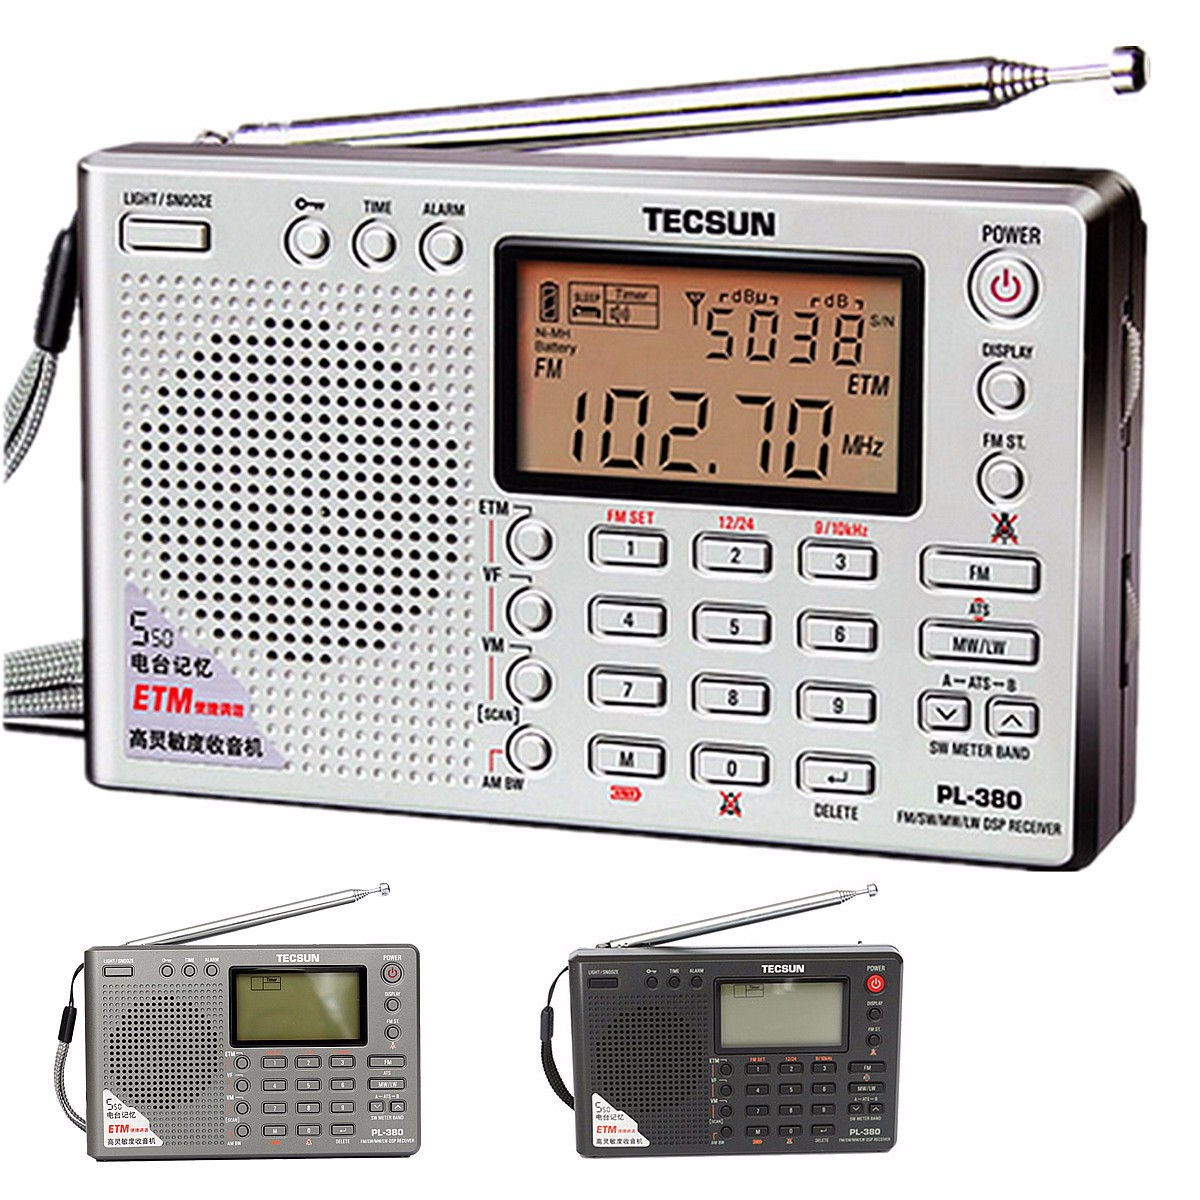 TECSUN PL-380 DSP PLL FM MW SW LW Digital Stereo Radio World-Band Receiver New 3 Colors 7 Tuning Mode Selectable 135x86x29mm